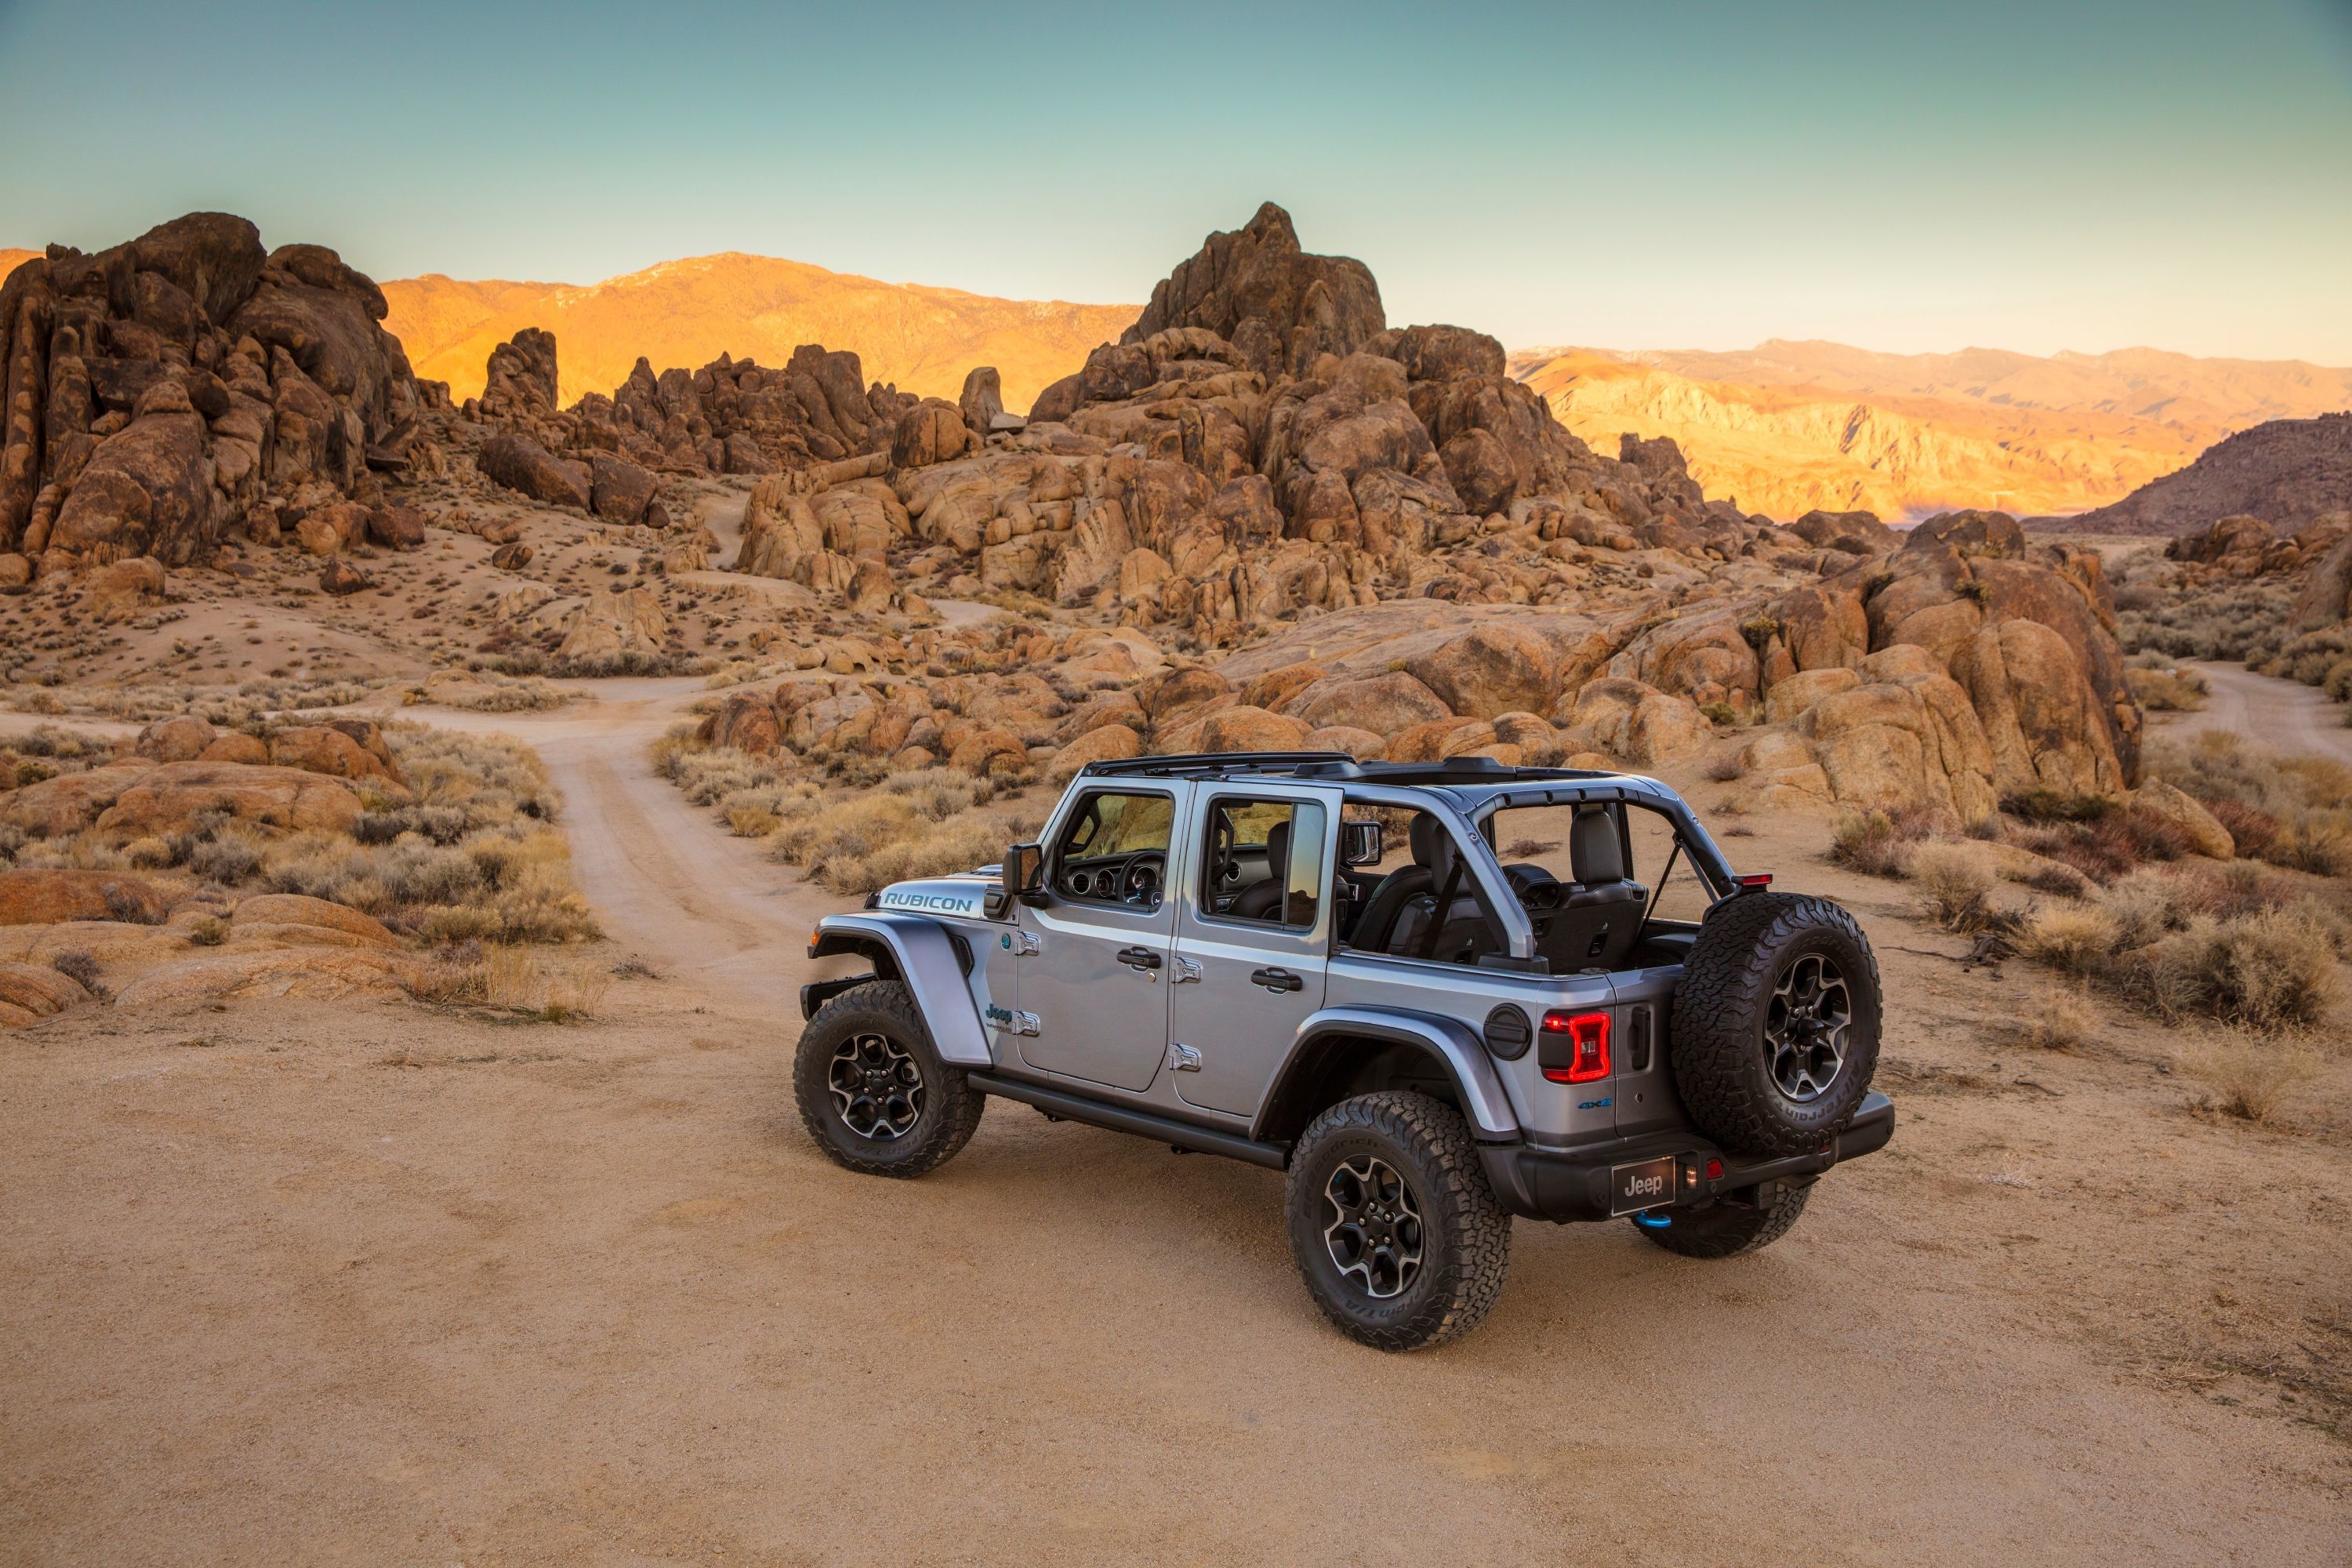 Jeep really blows the doors off with Wrangler 4xe